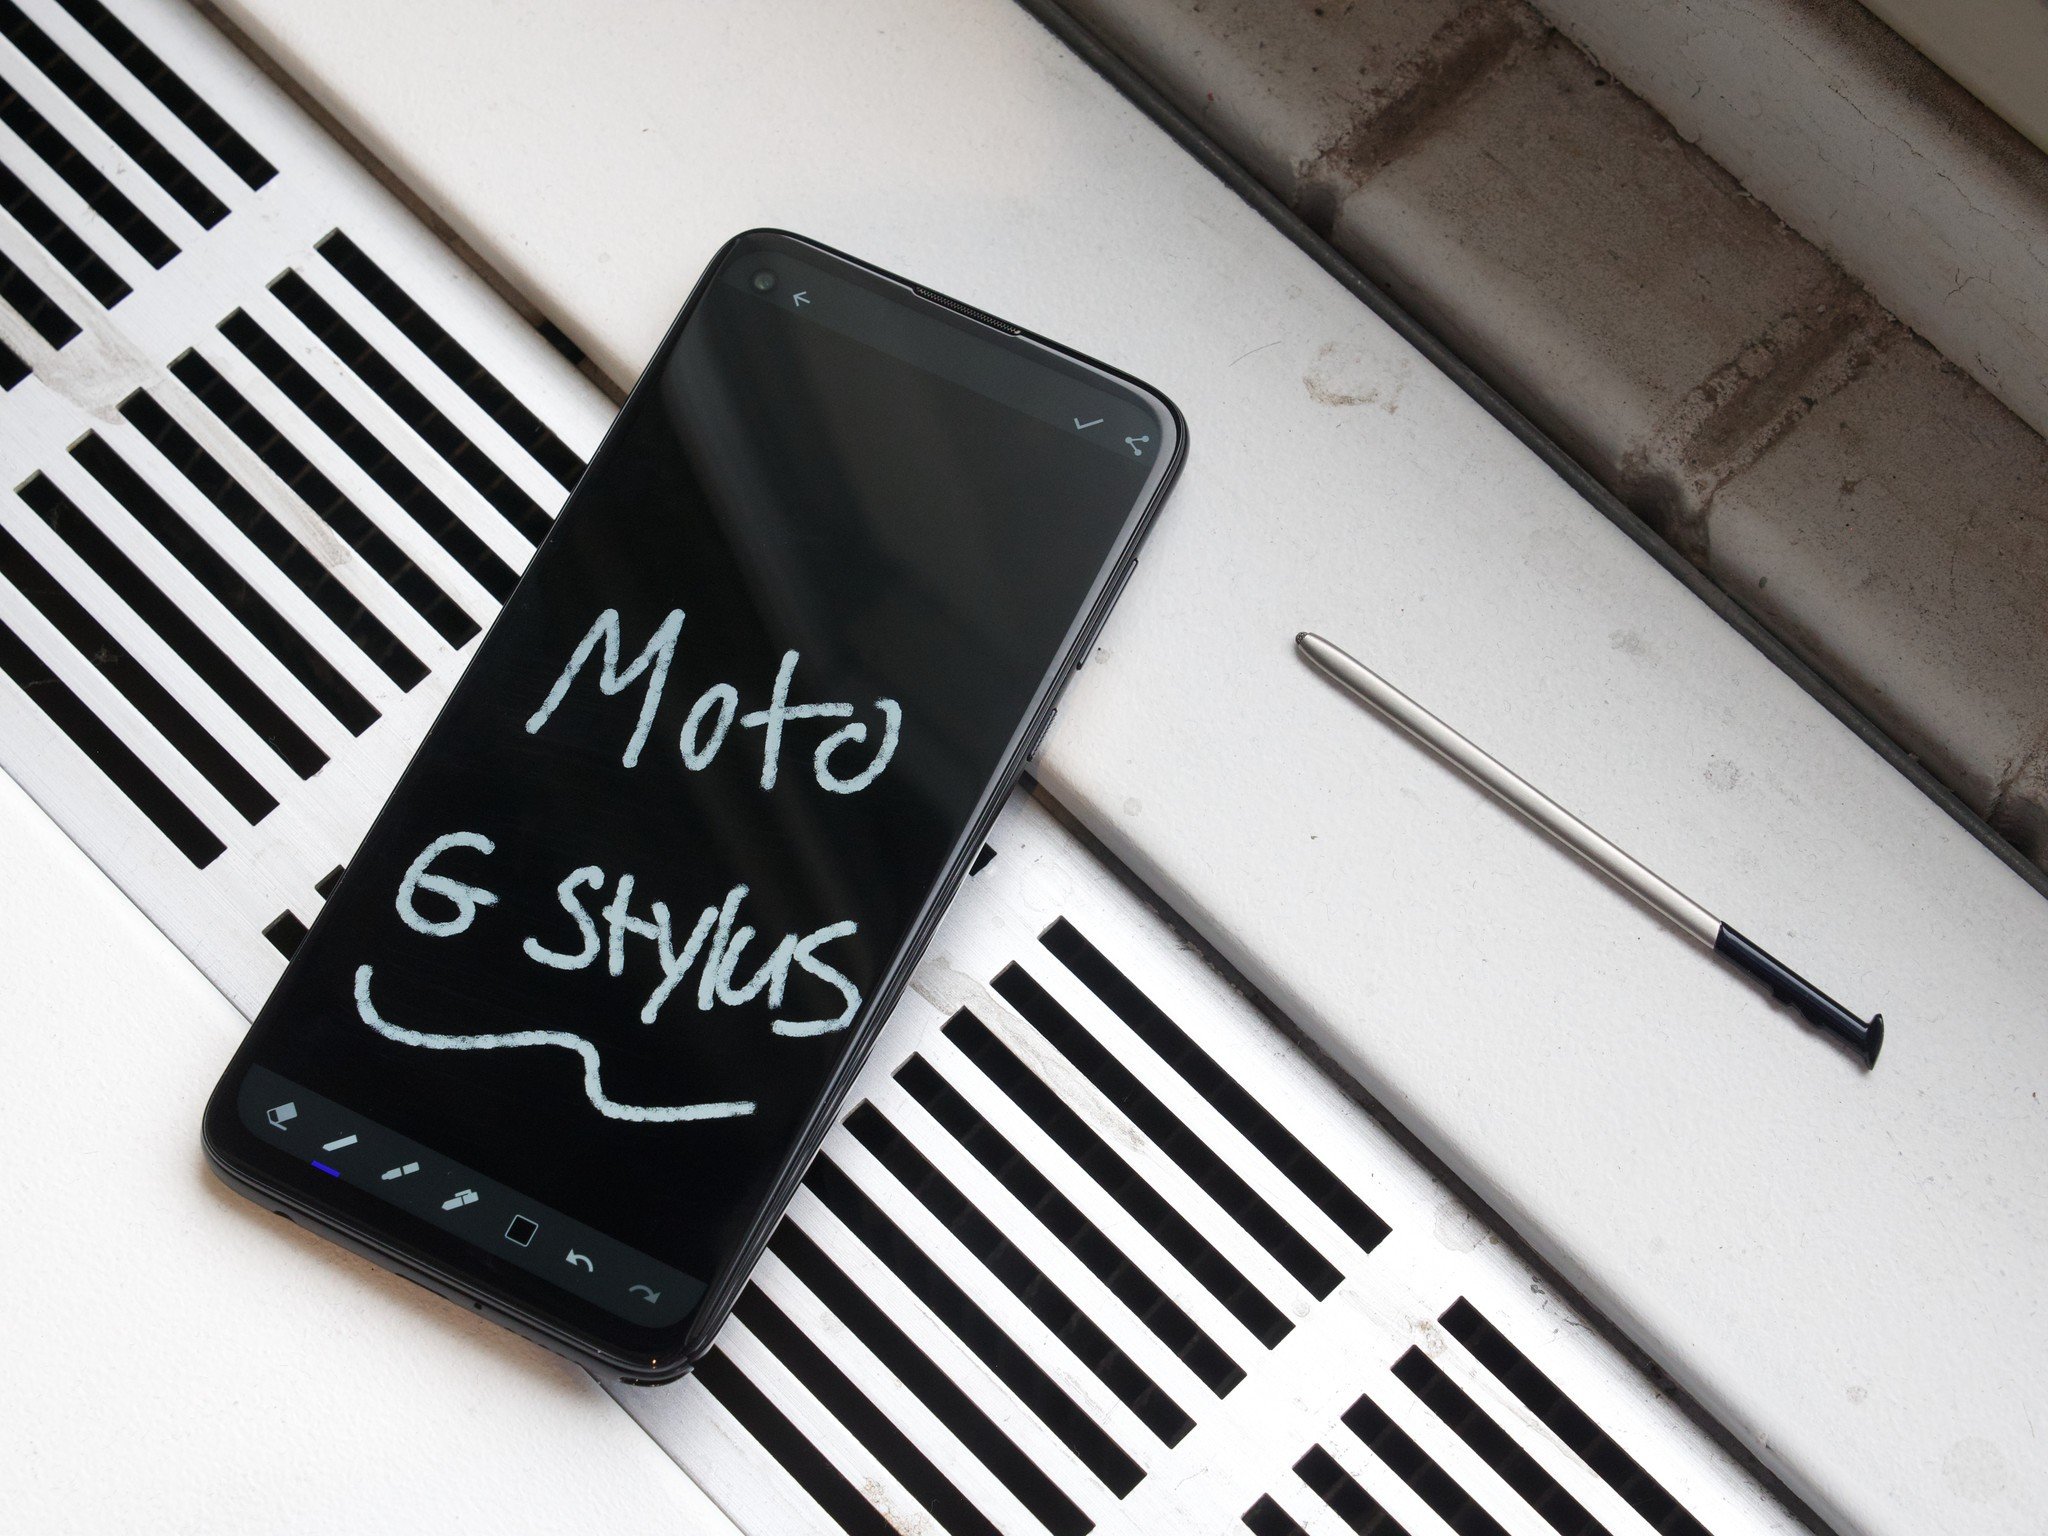 Where to buy the Moto G Stylus and Moto G Power Android